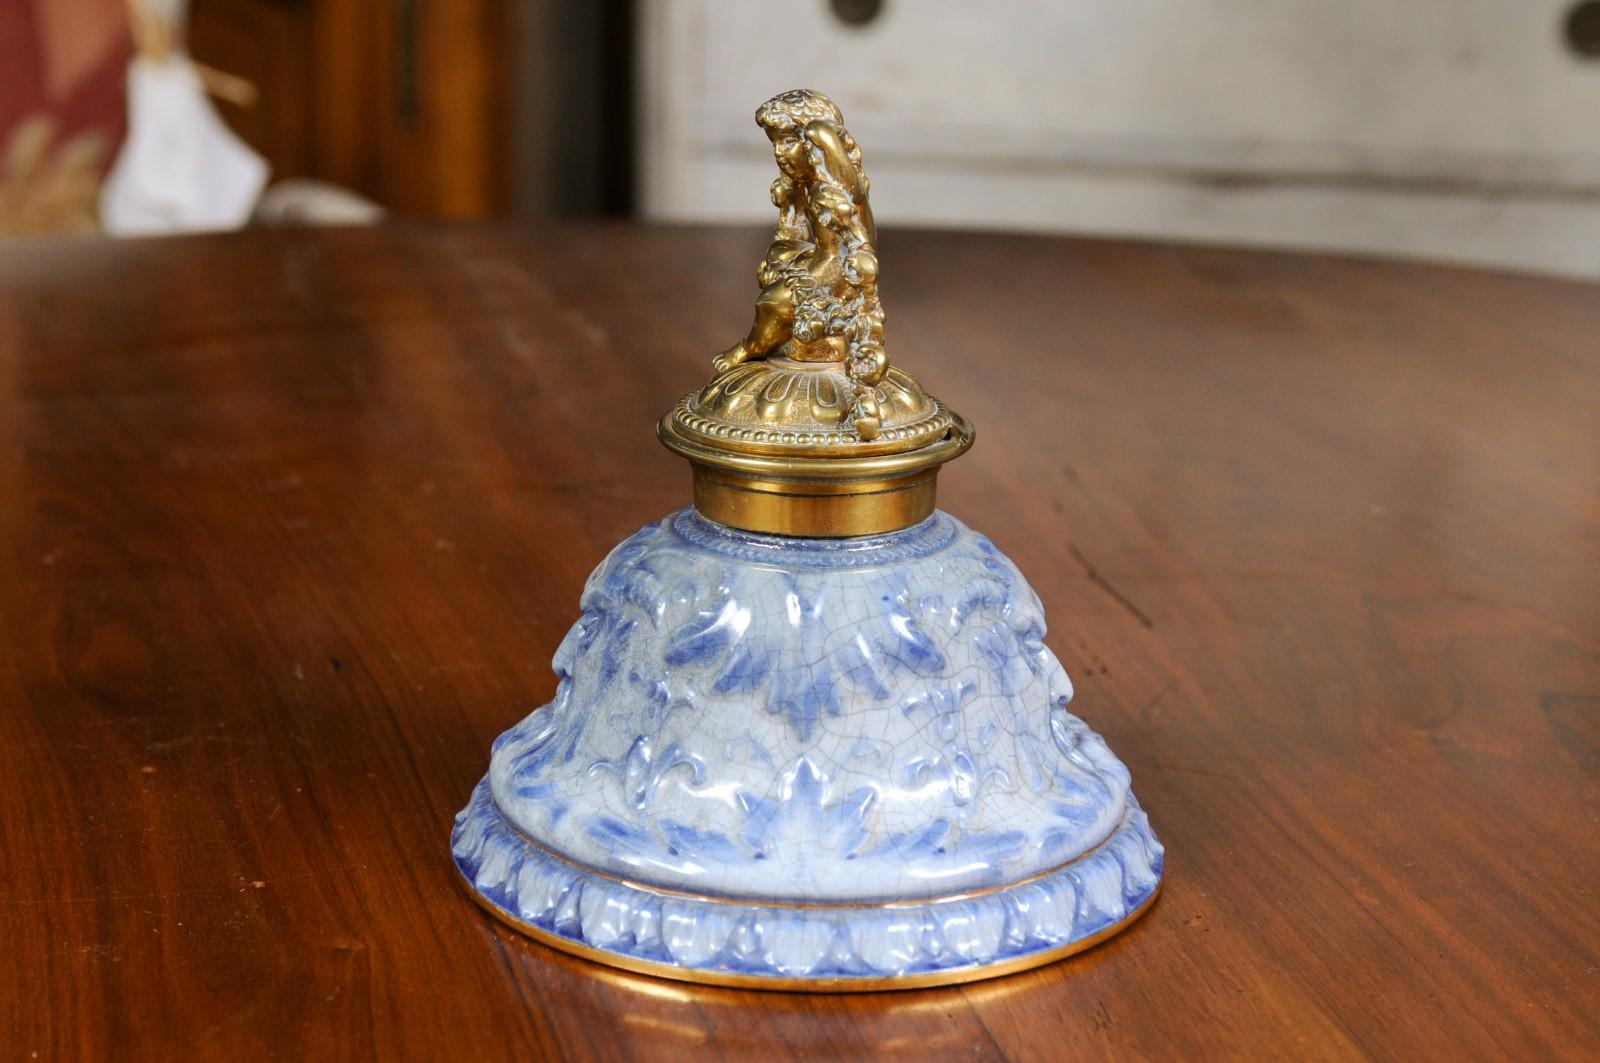 English Victorian Period 19th Century Porcelain Inkwell with Brass Putto Motif For Sale 1